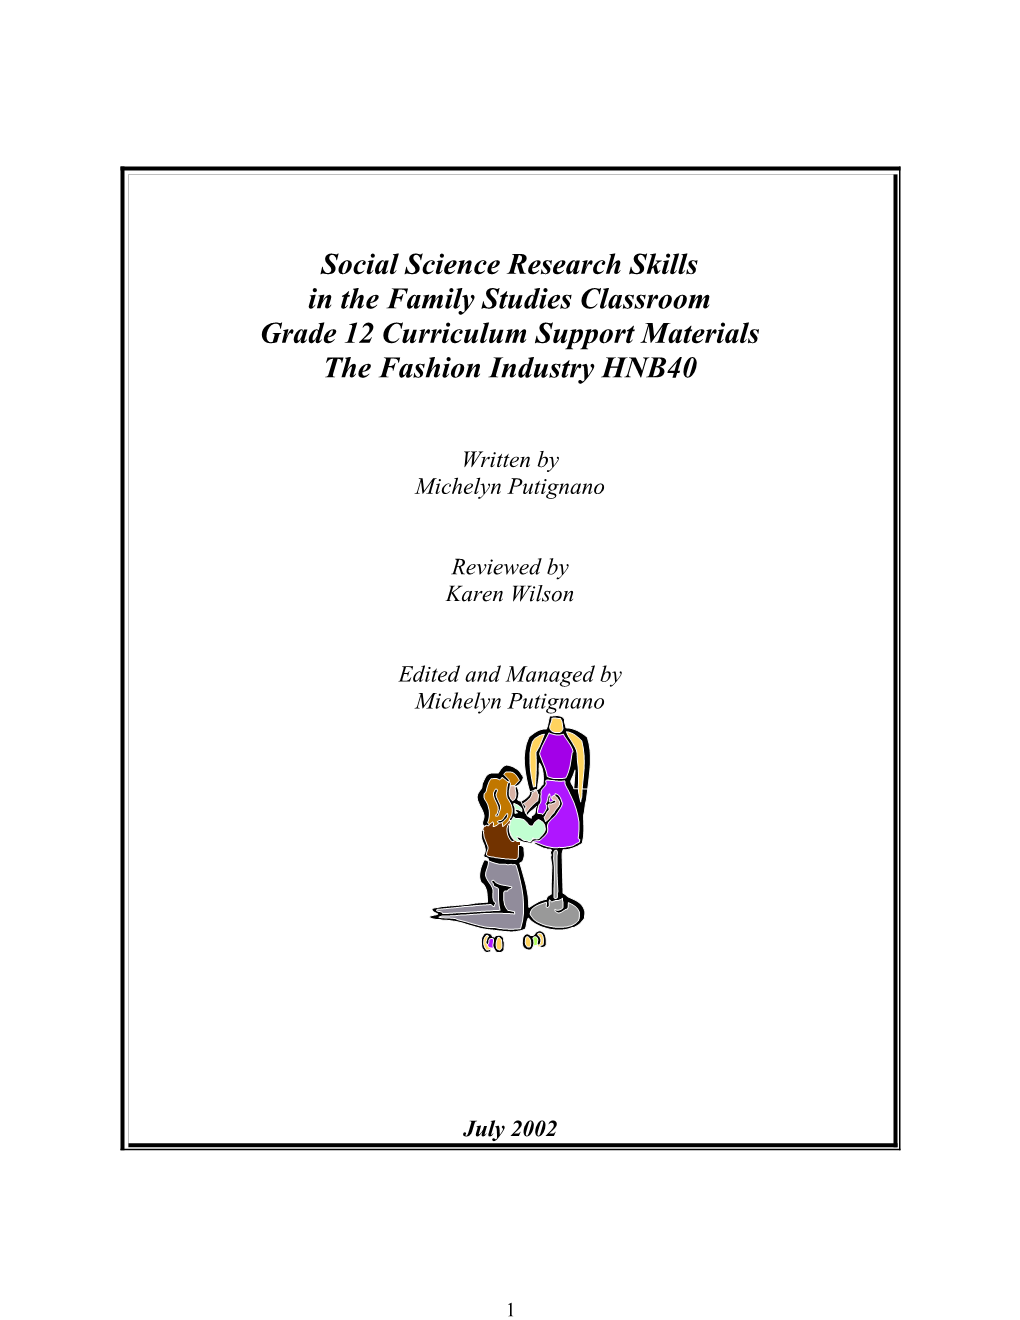 Social Science Research Skills Continuum